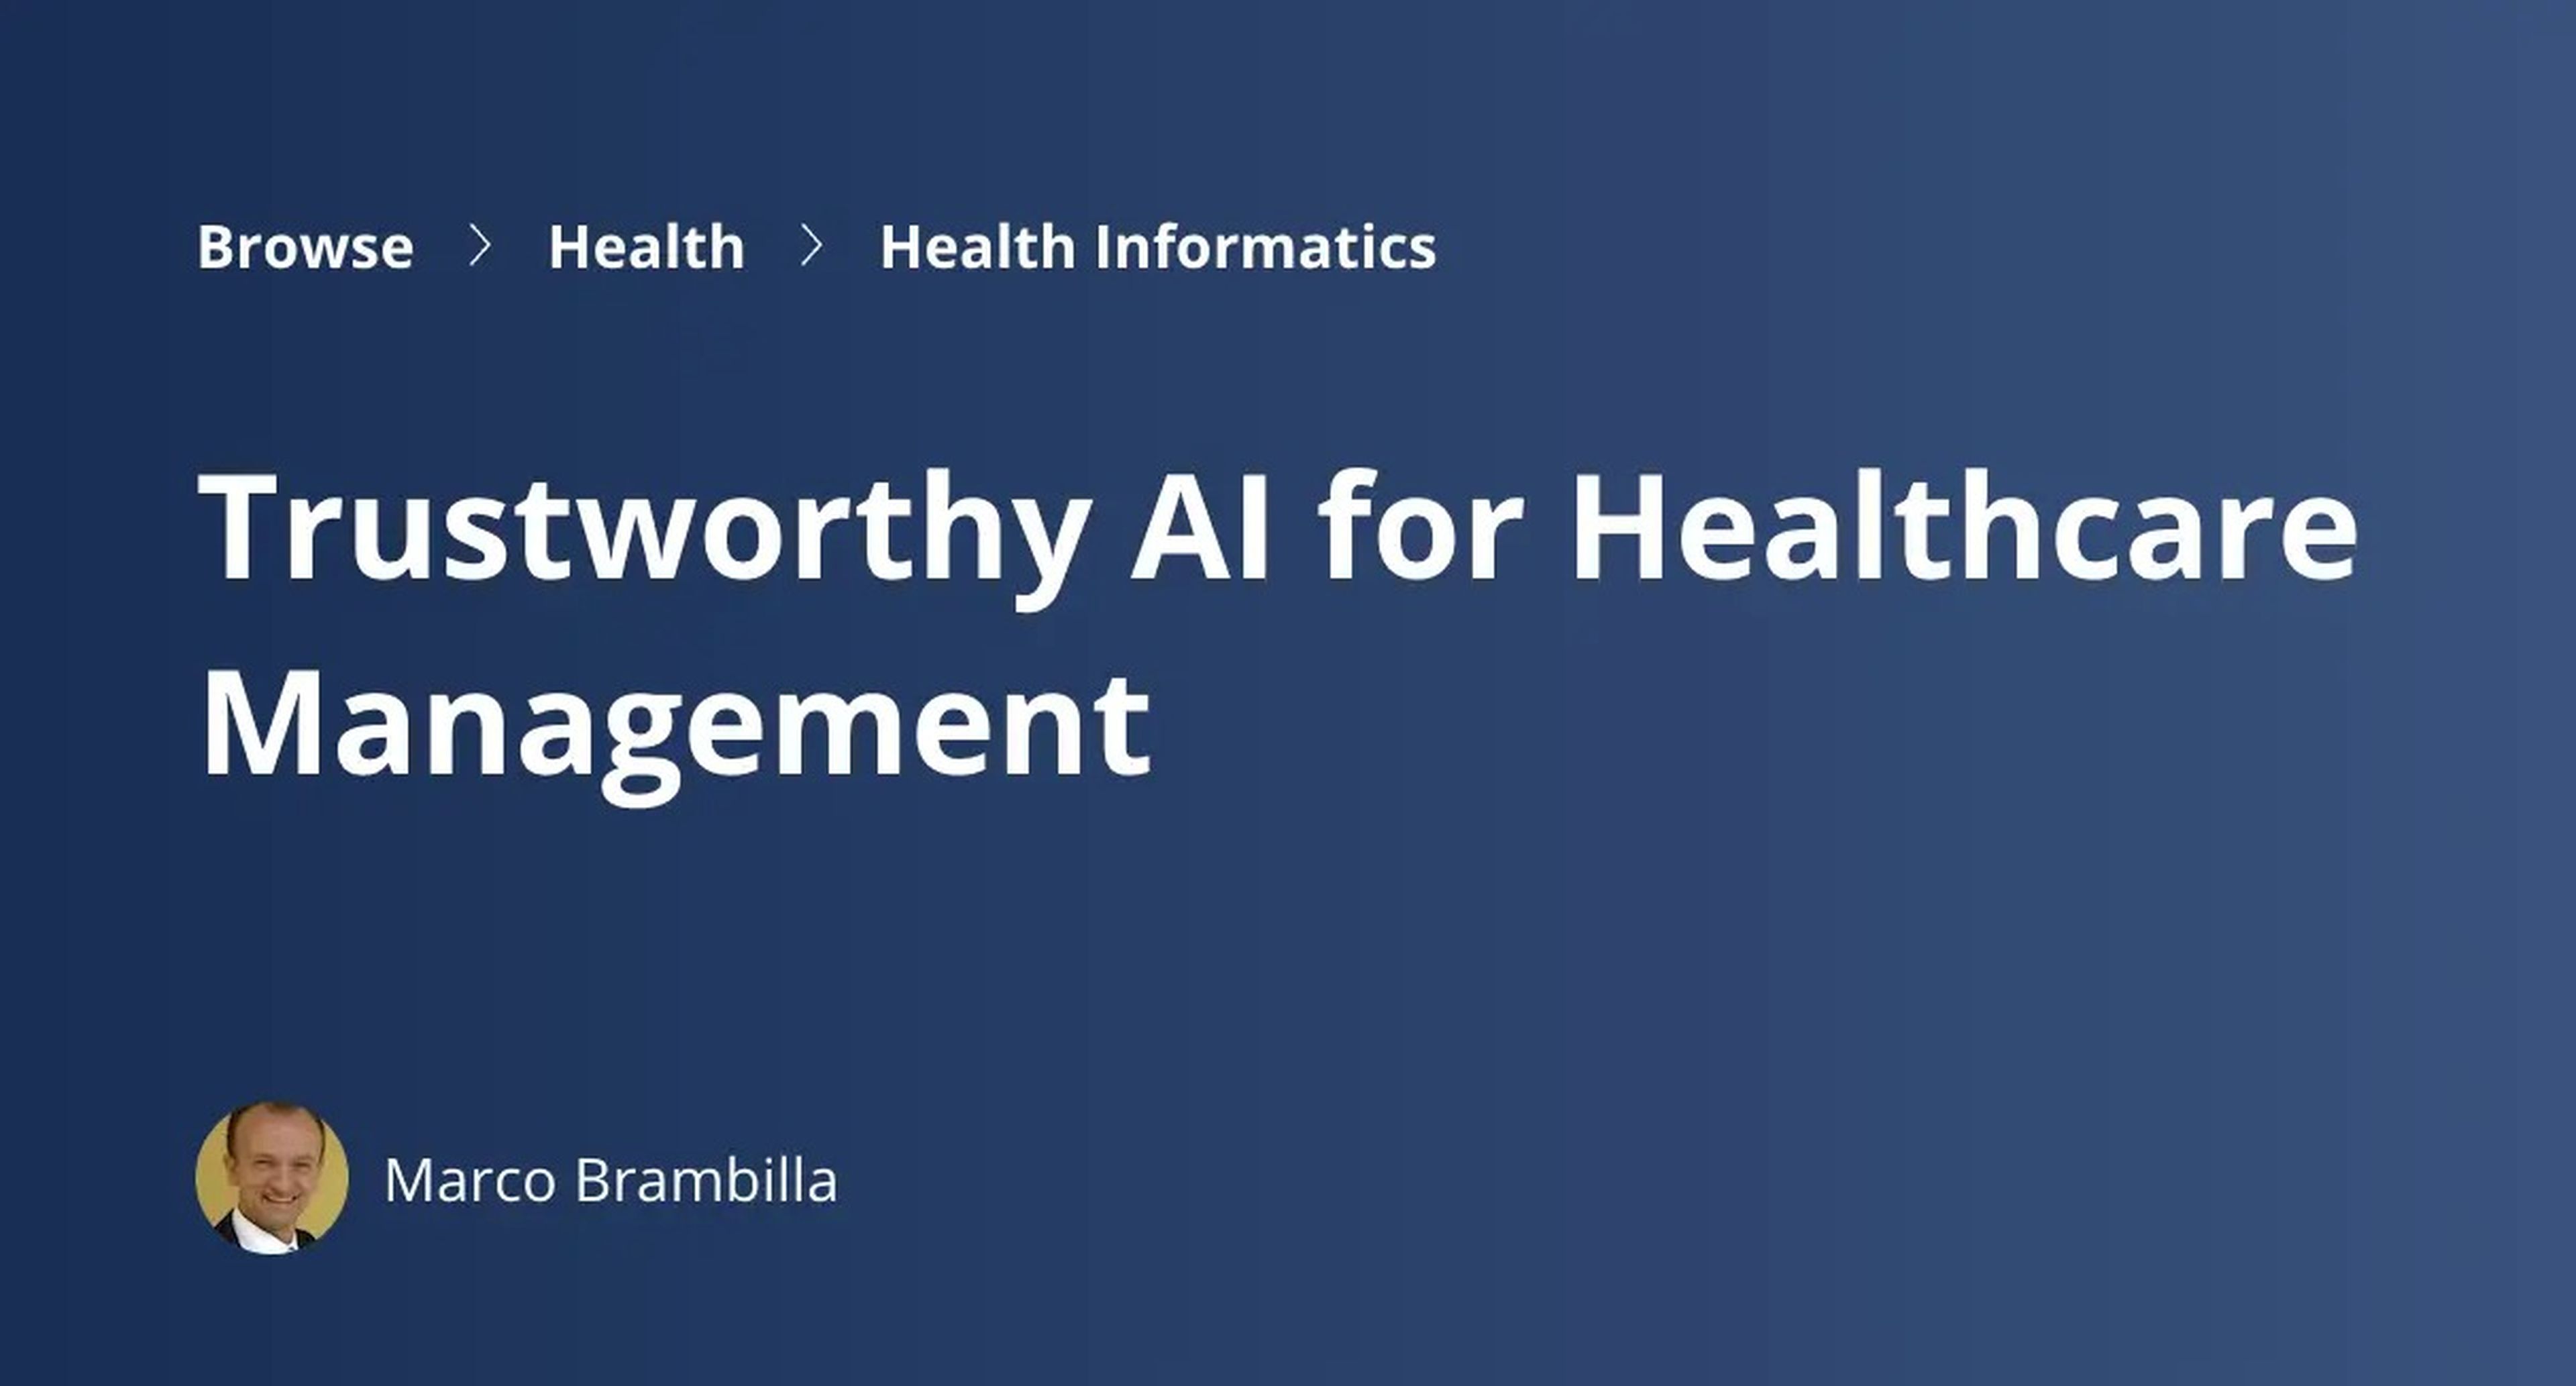 Trustworthy AI for Healthcare Management Coursera course